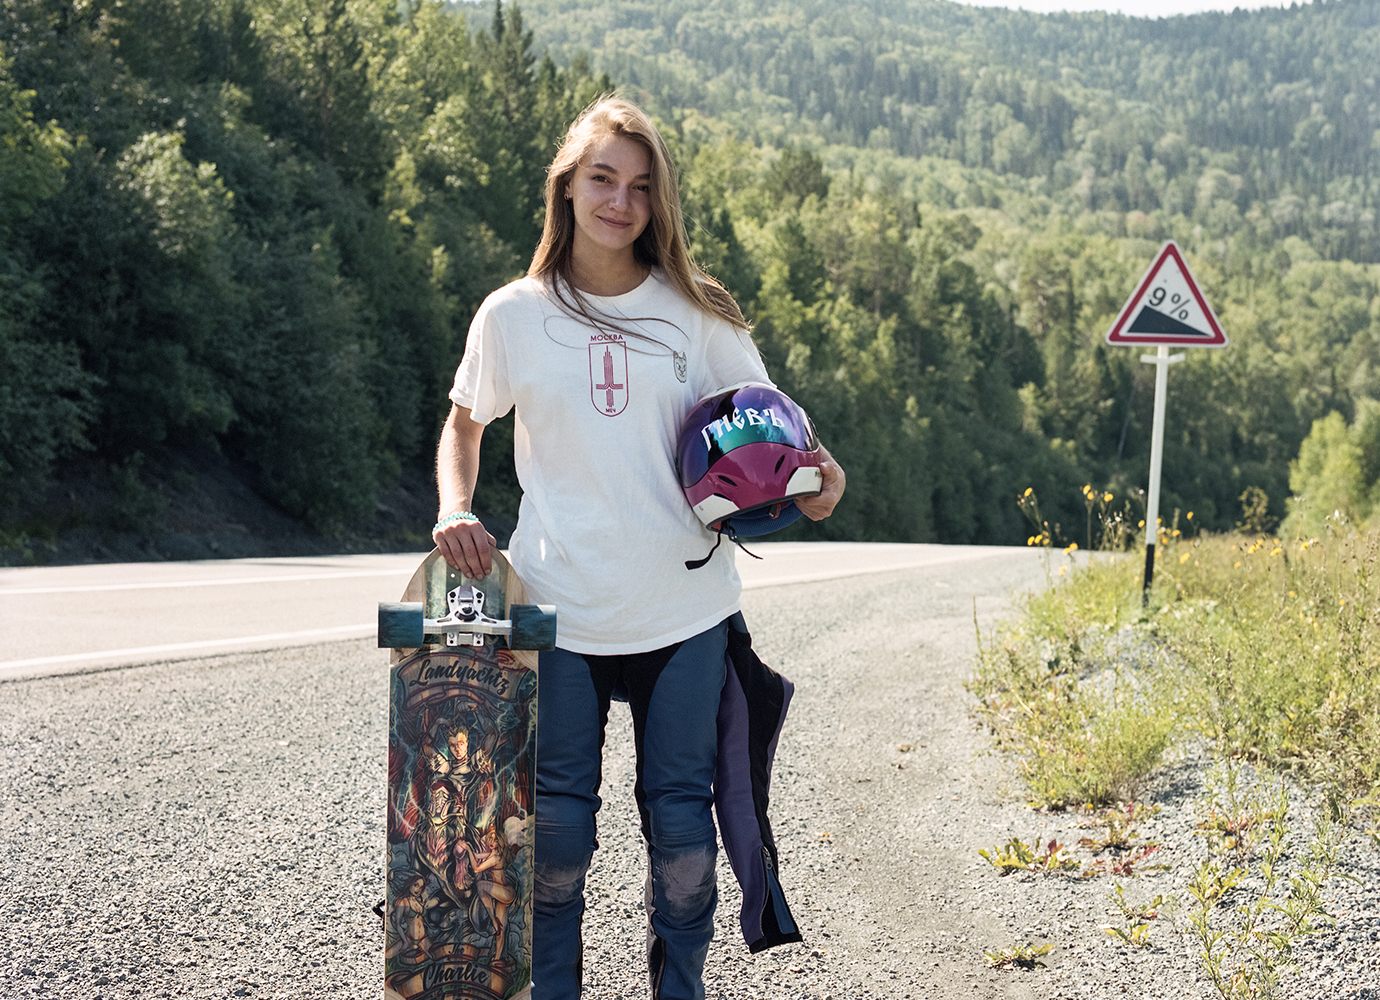 Siberia’s longboarders are chasing new horizons